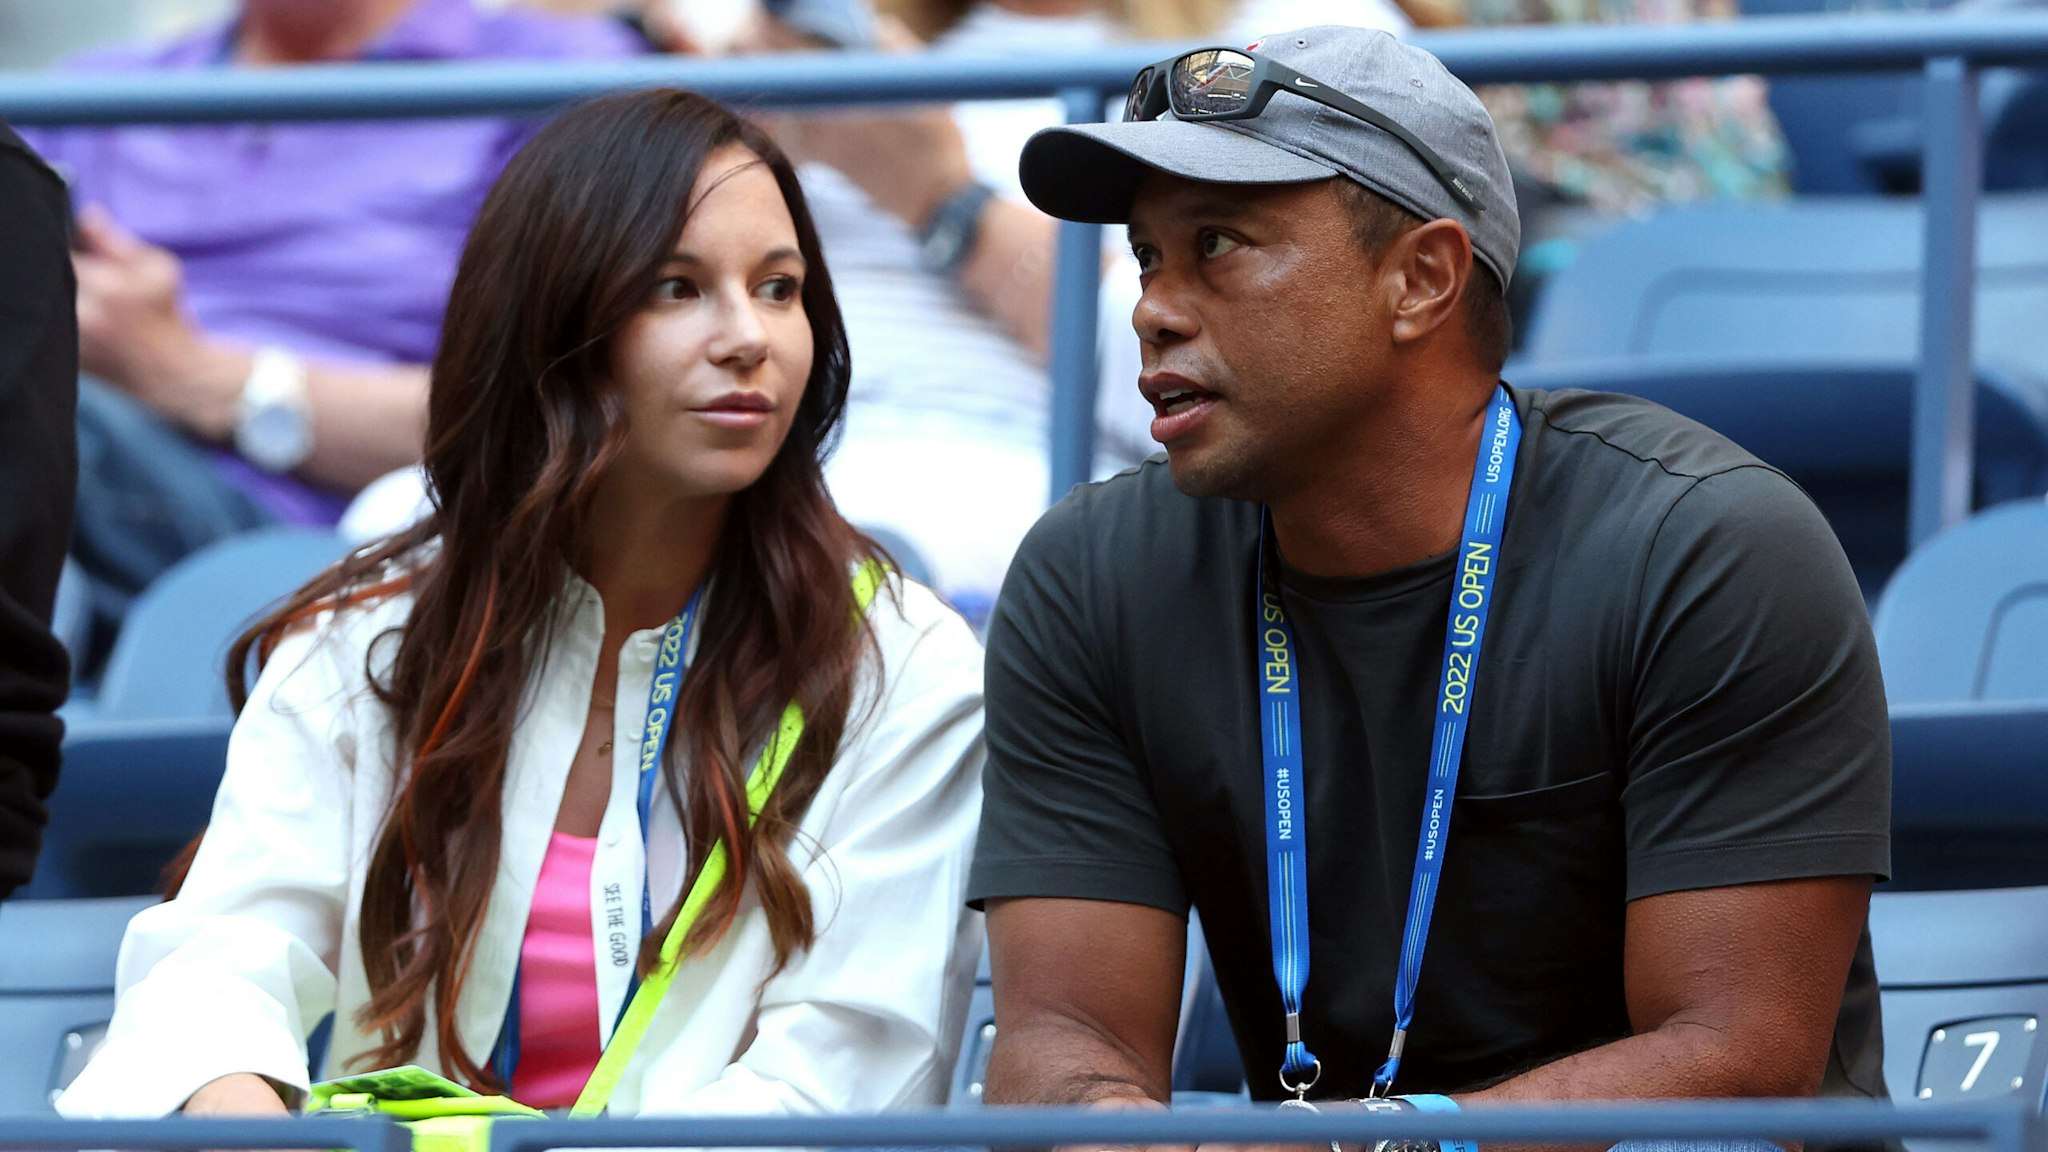 NEW YORK, NEW YORK - AUGUST 31: Erica Herman and Tiger Woods look on prior to the Women's Singles Second Round match between Anett Kontaveit of Estonia and Serena Williams of the United States on Day Three of the 2022 US Open at USTA Billie Jean King National Tennis Center on August 31, 2022 in the Flushing neighborhood of the Queens borough of New York City.